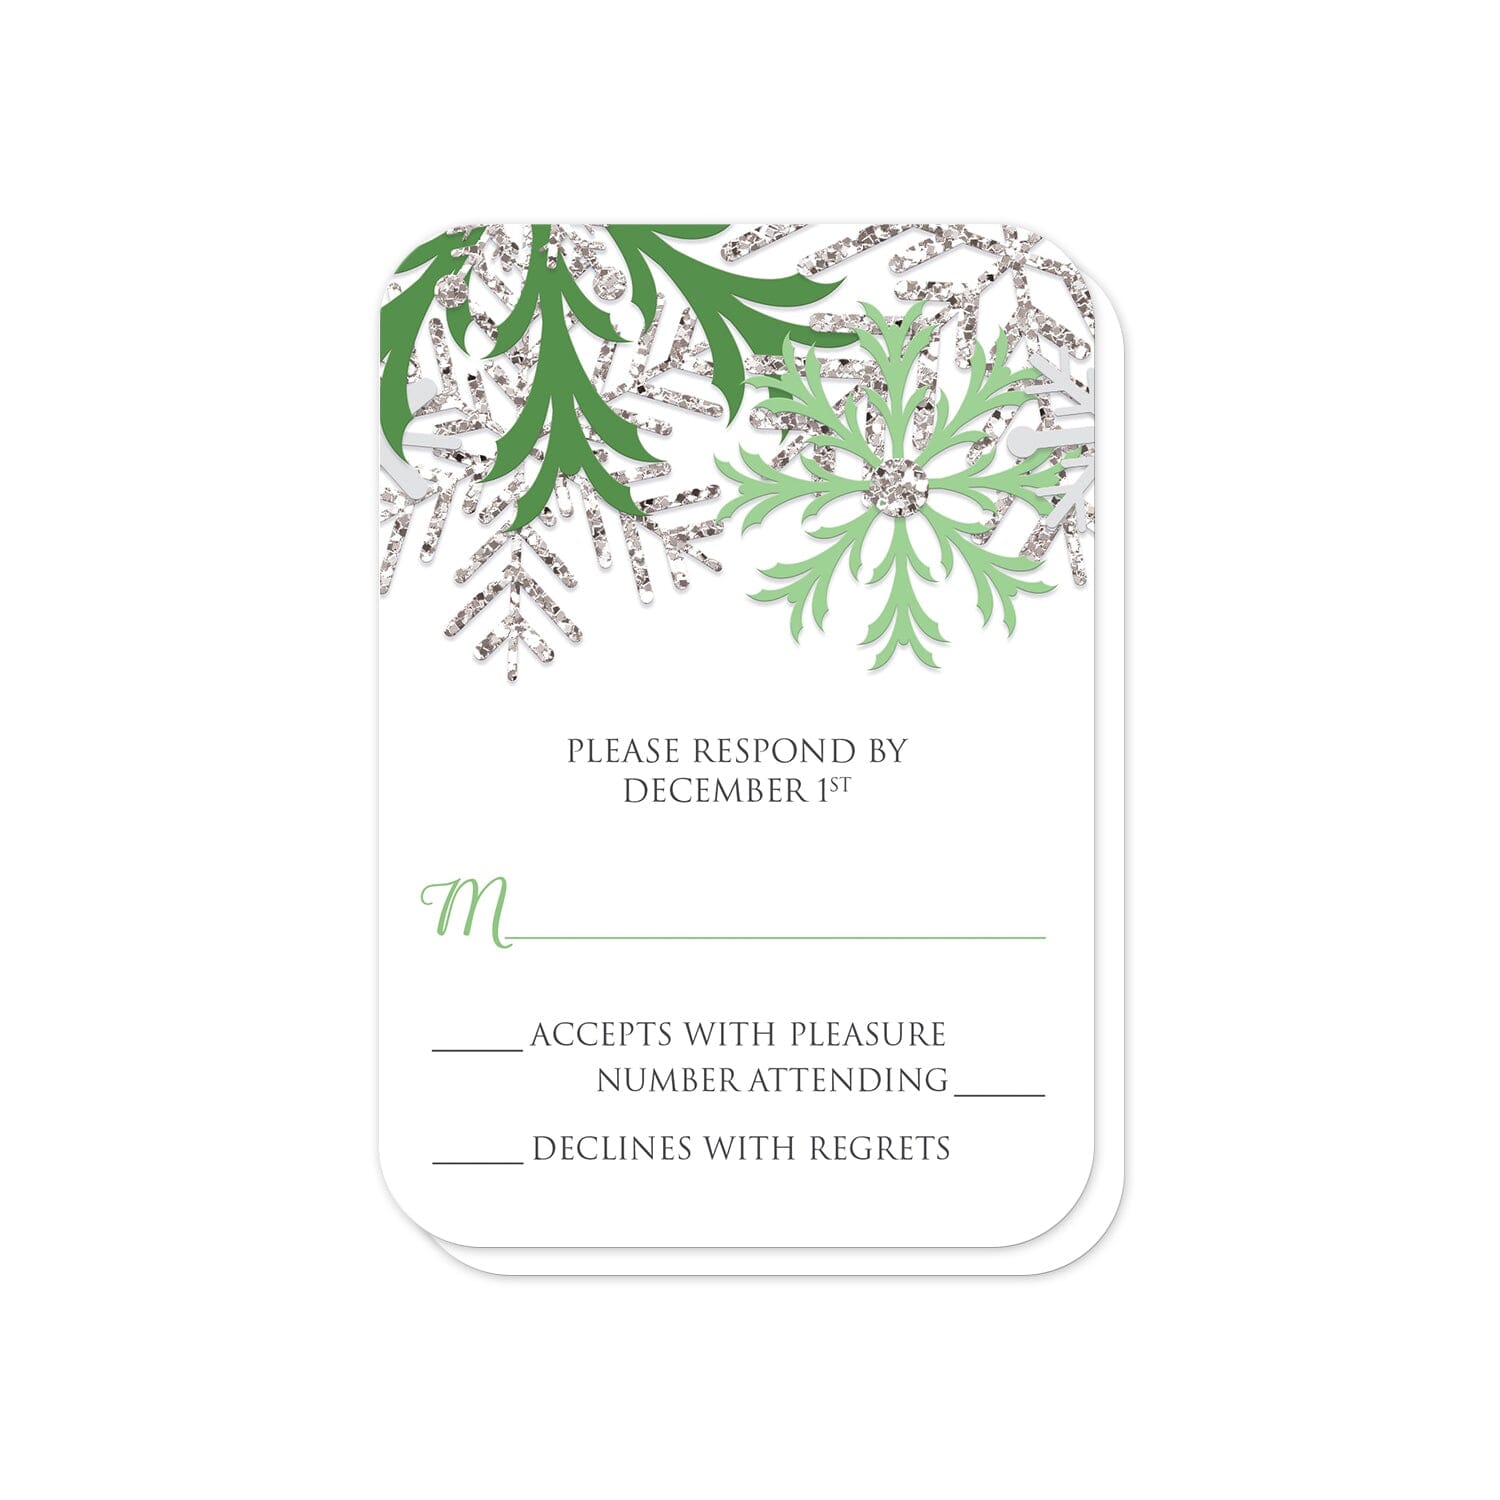 Winter Green Silver Snowflake RSVP Cards (with rounded corners) at Artistically Invited.